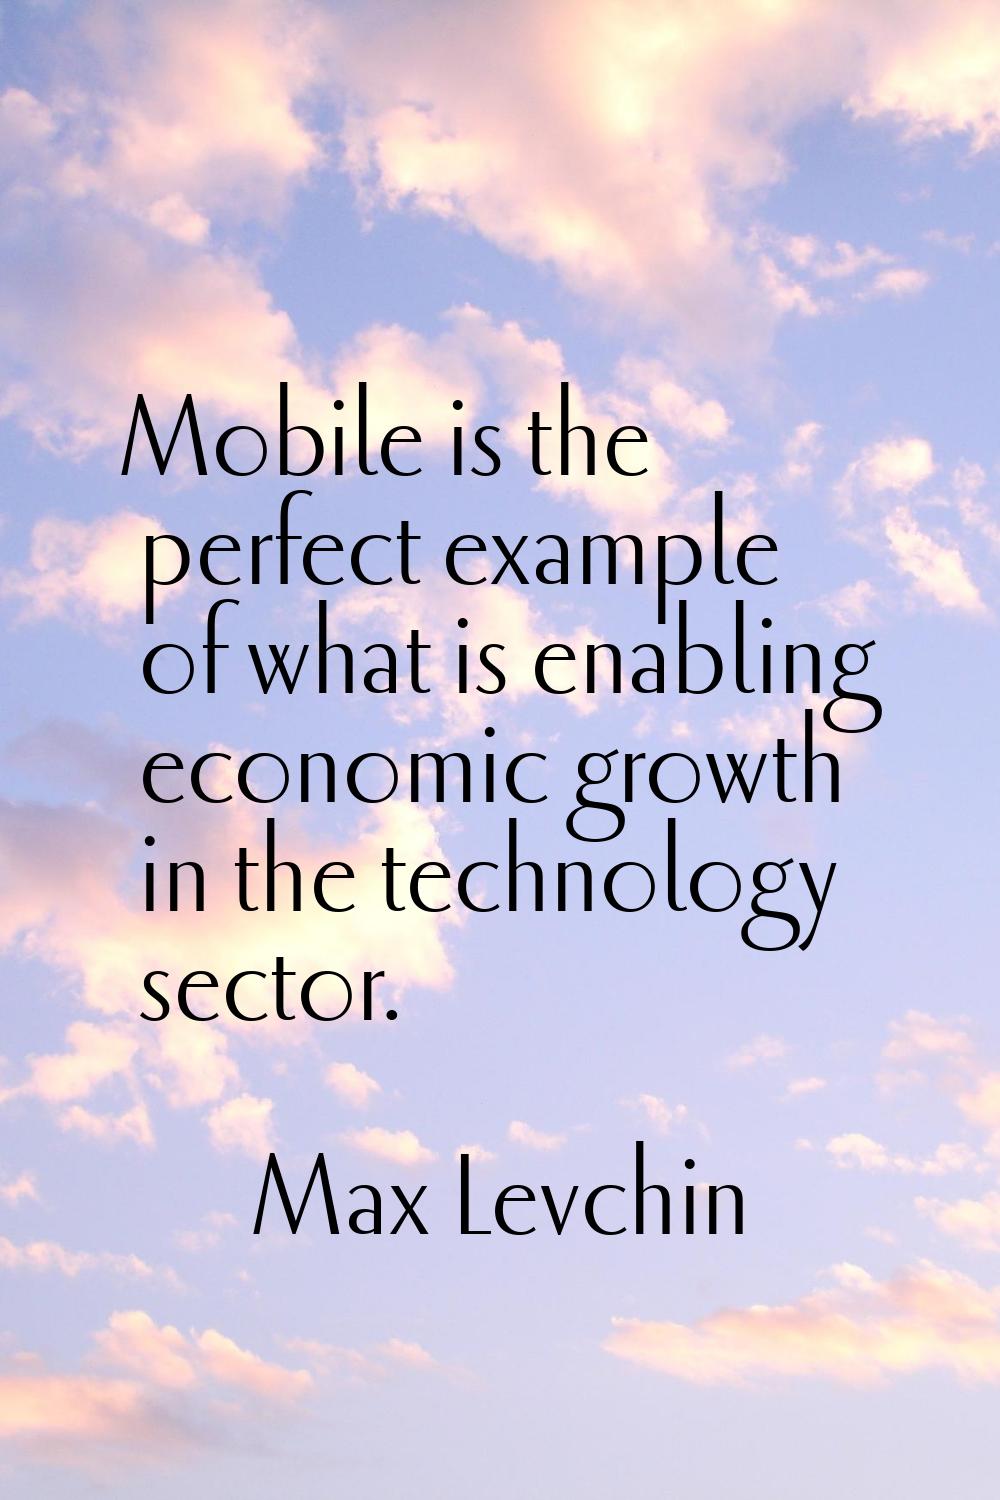 Mobile is the perfect example of what is enabling economic growth in the technology sector.